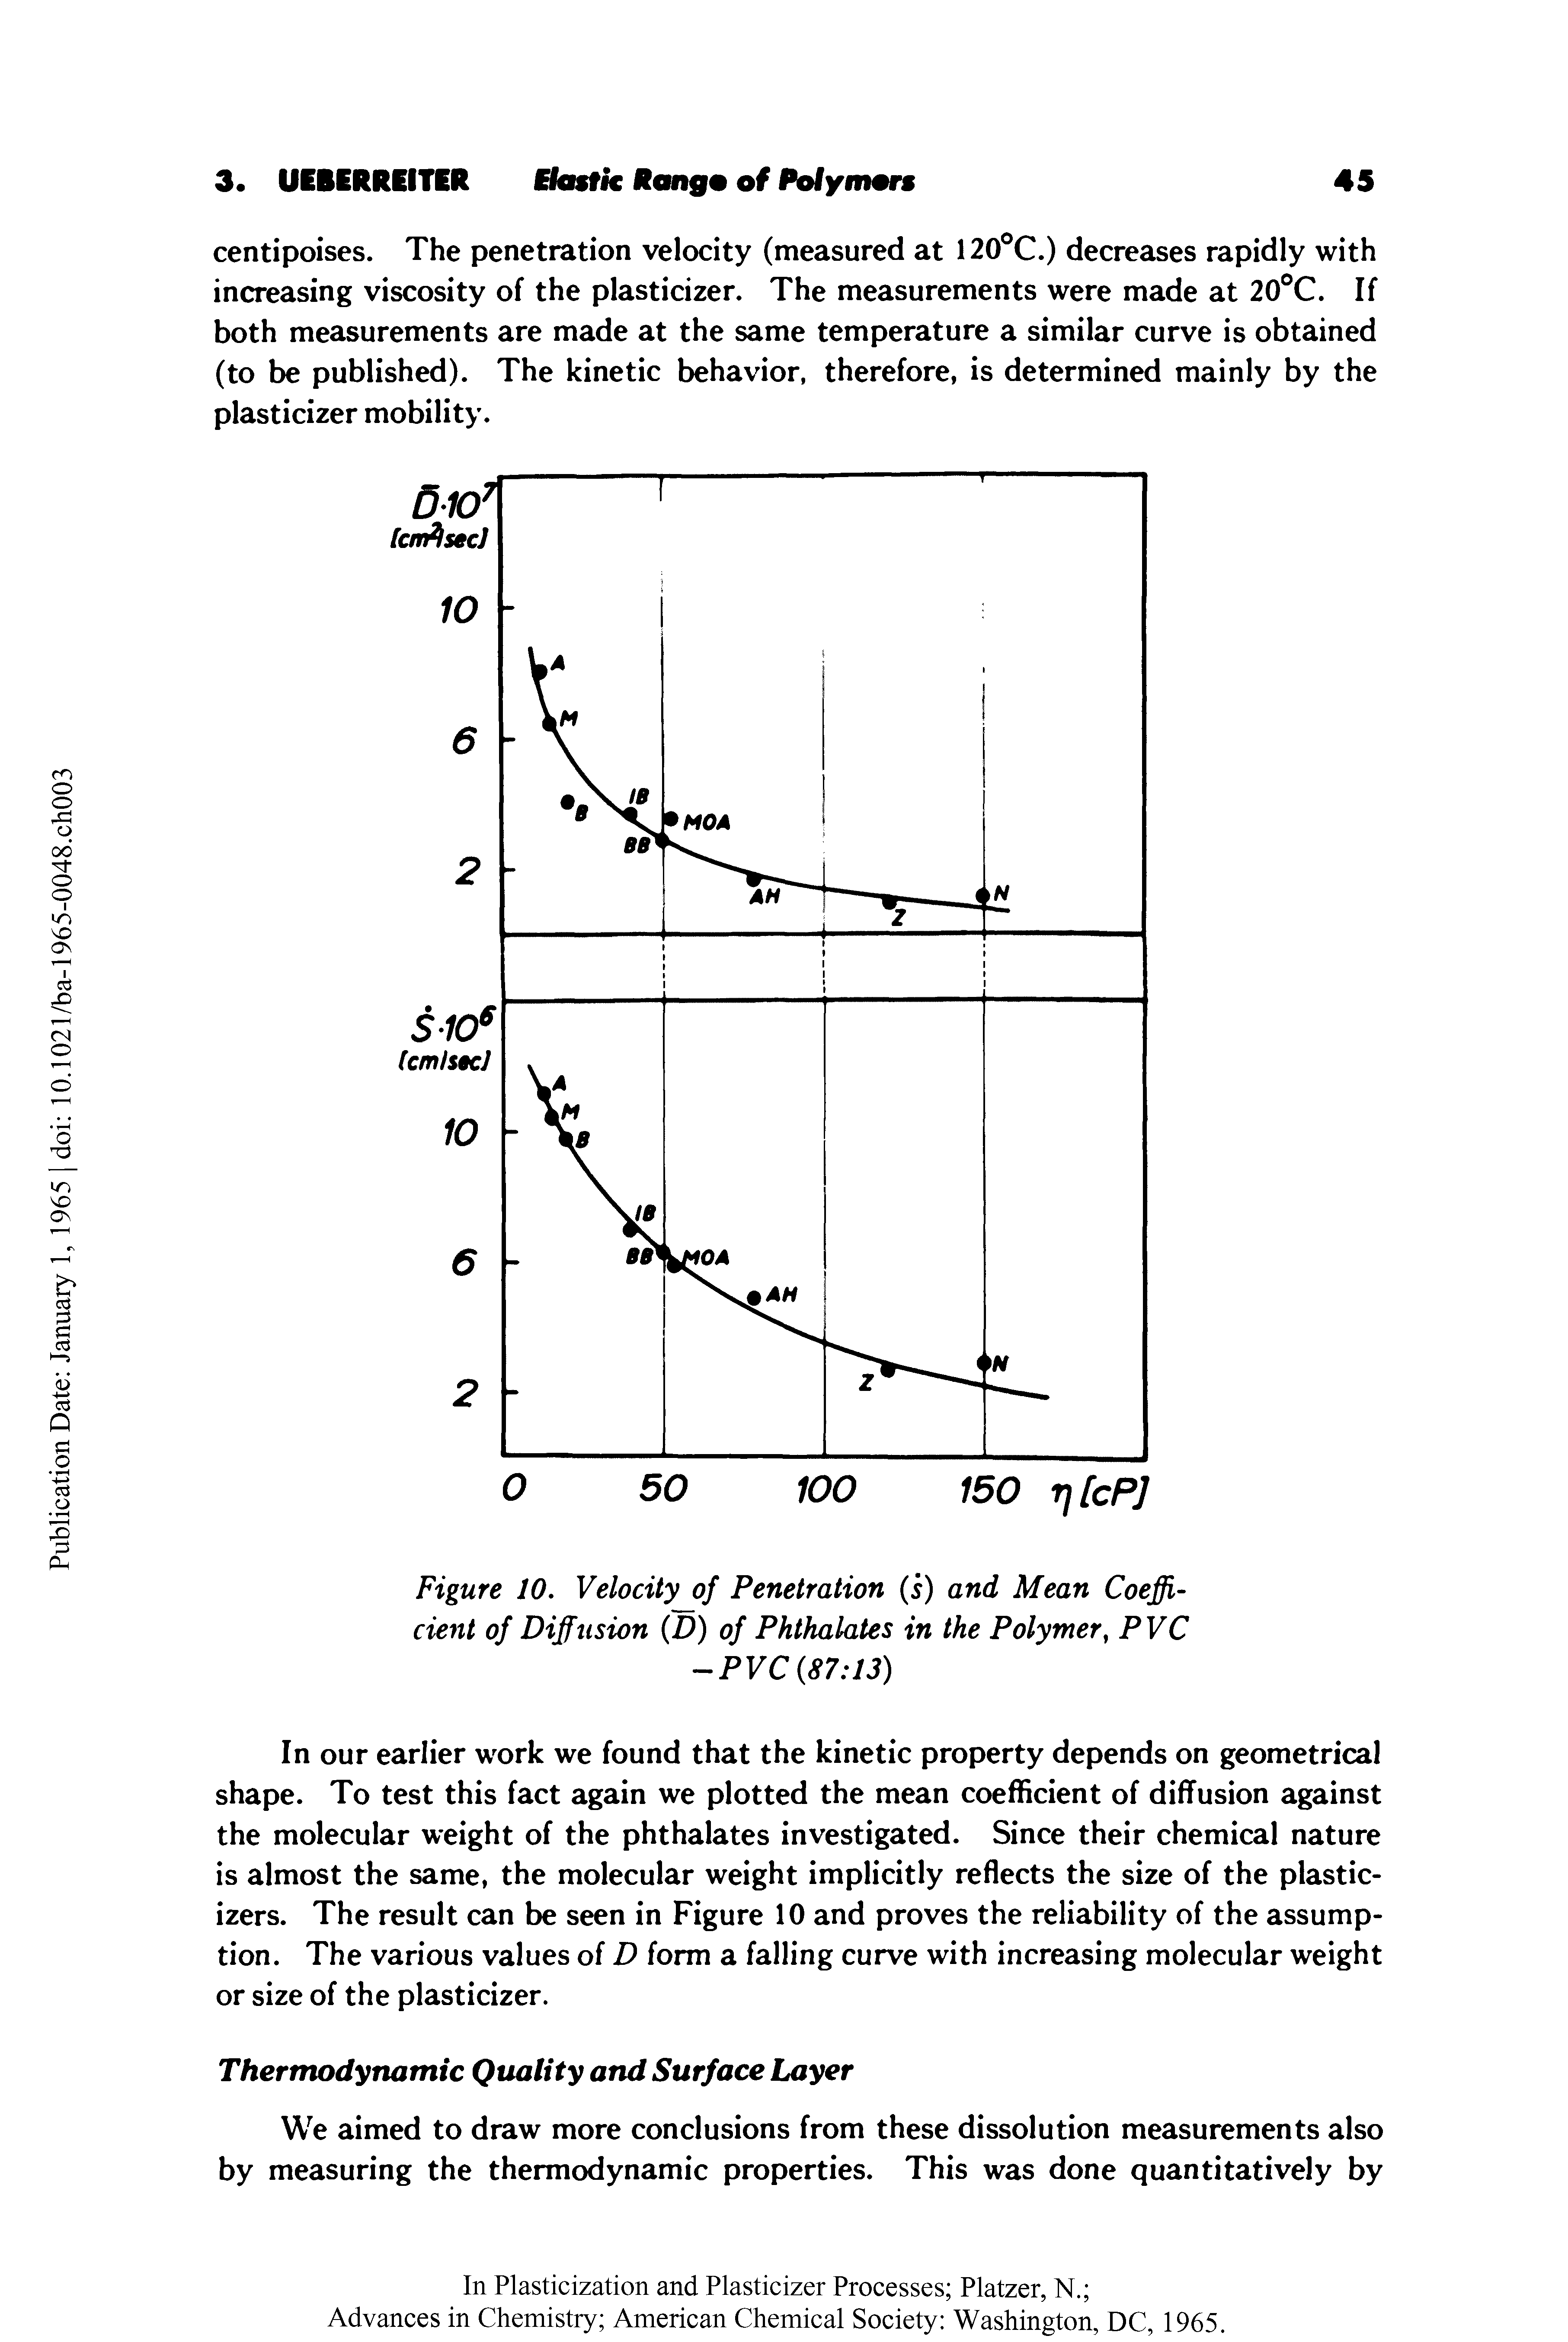 Figure 10. Velocity of Penetration (i) and Mean Coefficient of Diffusion (D) of Phthalates in the Polymer, PVC -PVC (87 13)...